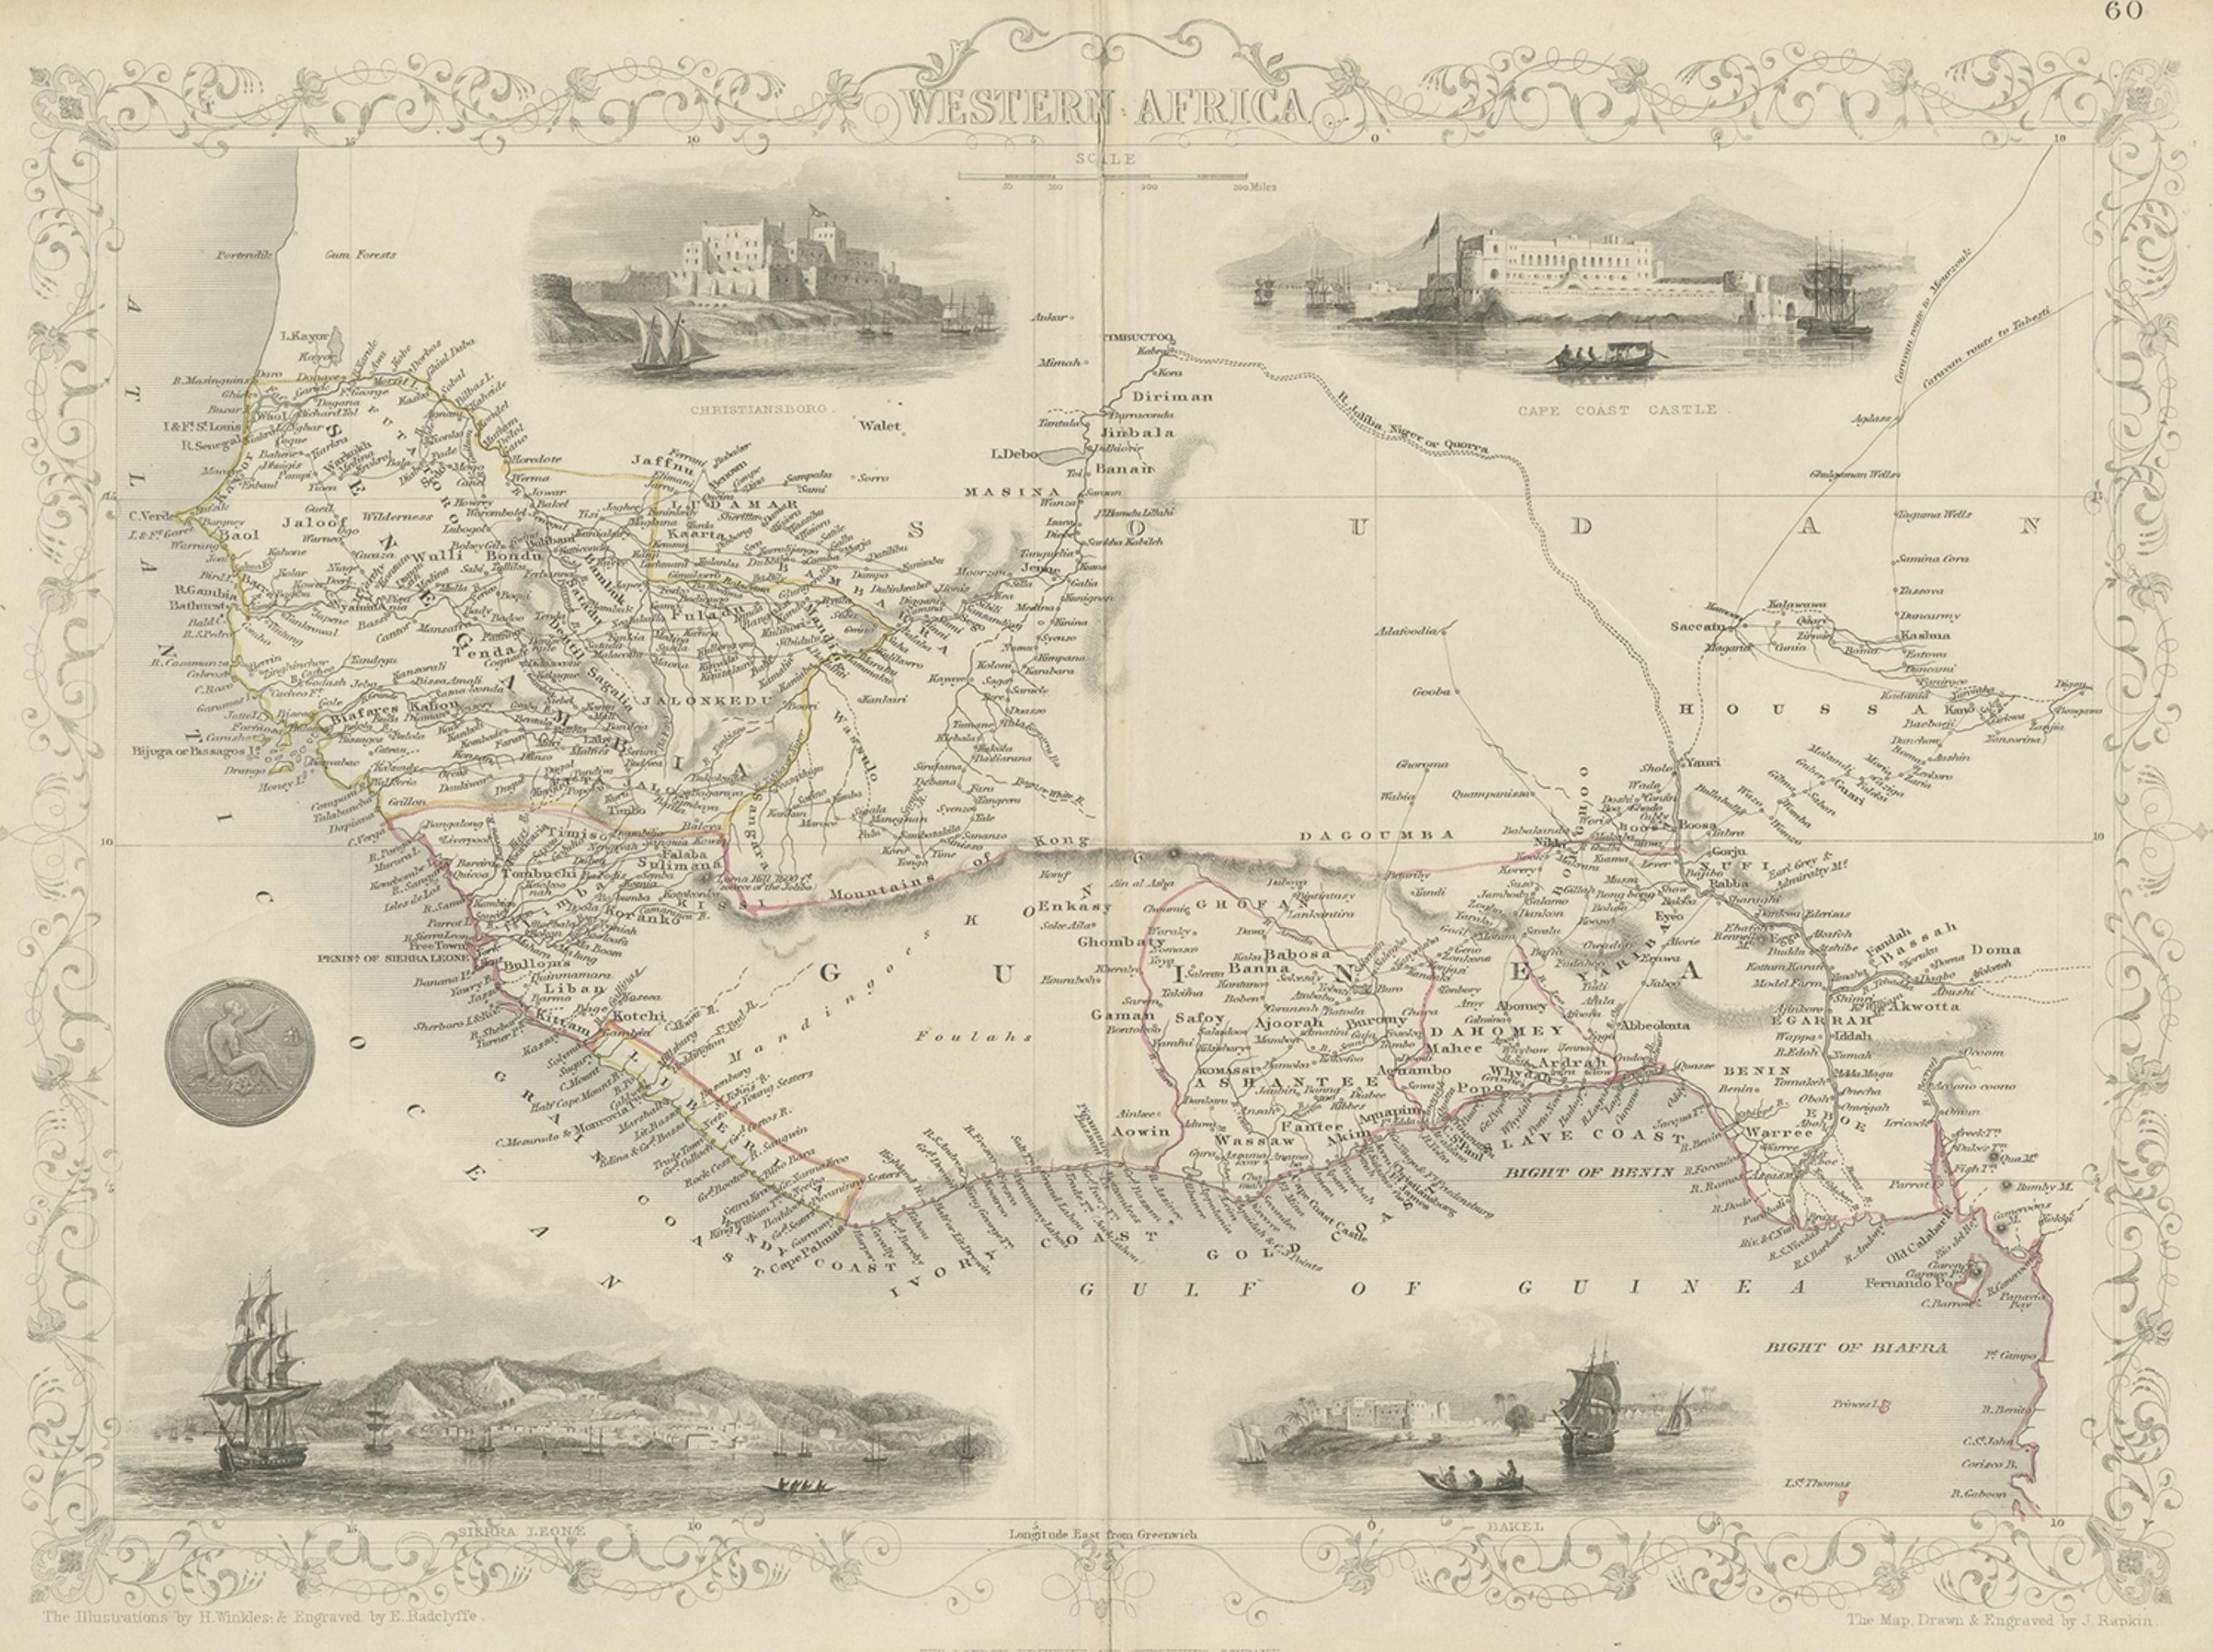 Antique map titled ‘Western Africa’. Includes decorative vignettes titled Christiansborg, Cape Coast Castle, Sierra Leone and Bakel. Originates from 'The Illustrated Atlas, And Modern History Of The World Geographical, Political, Commercial &